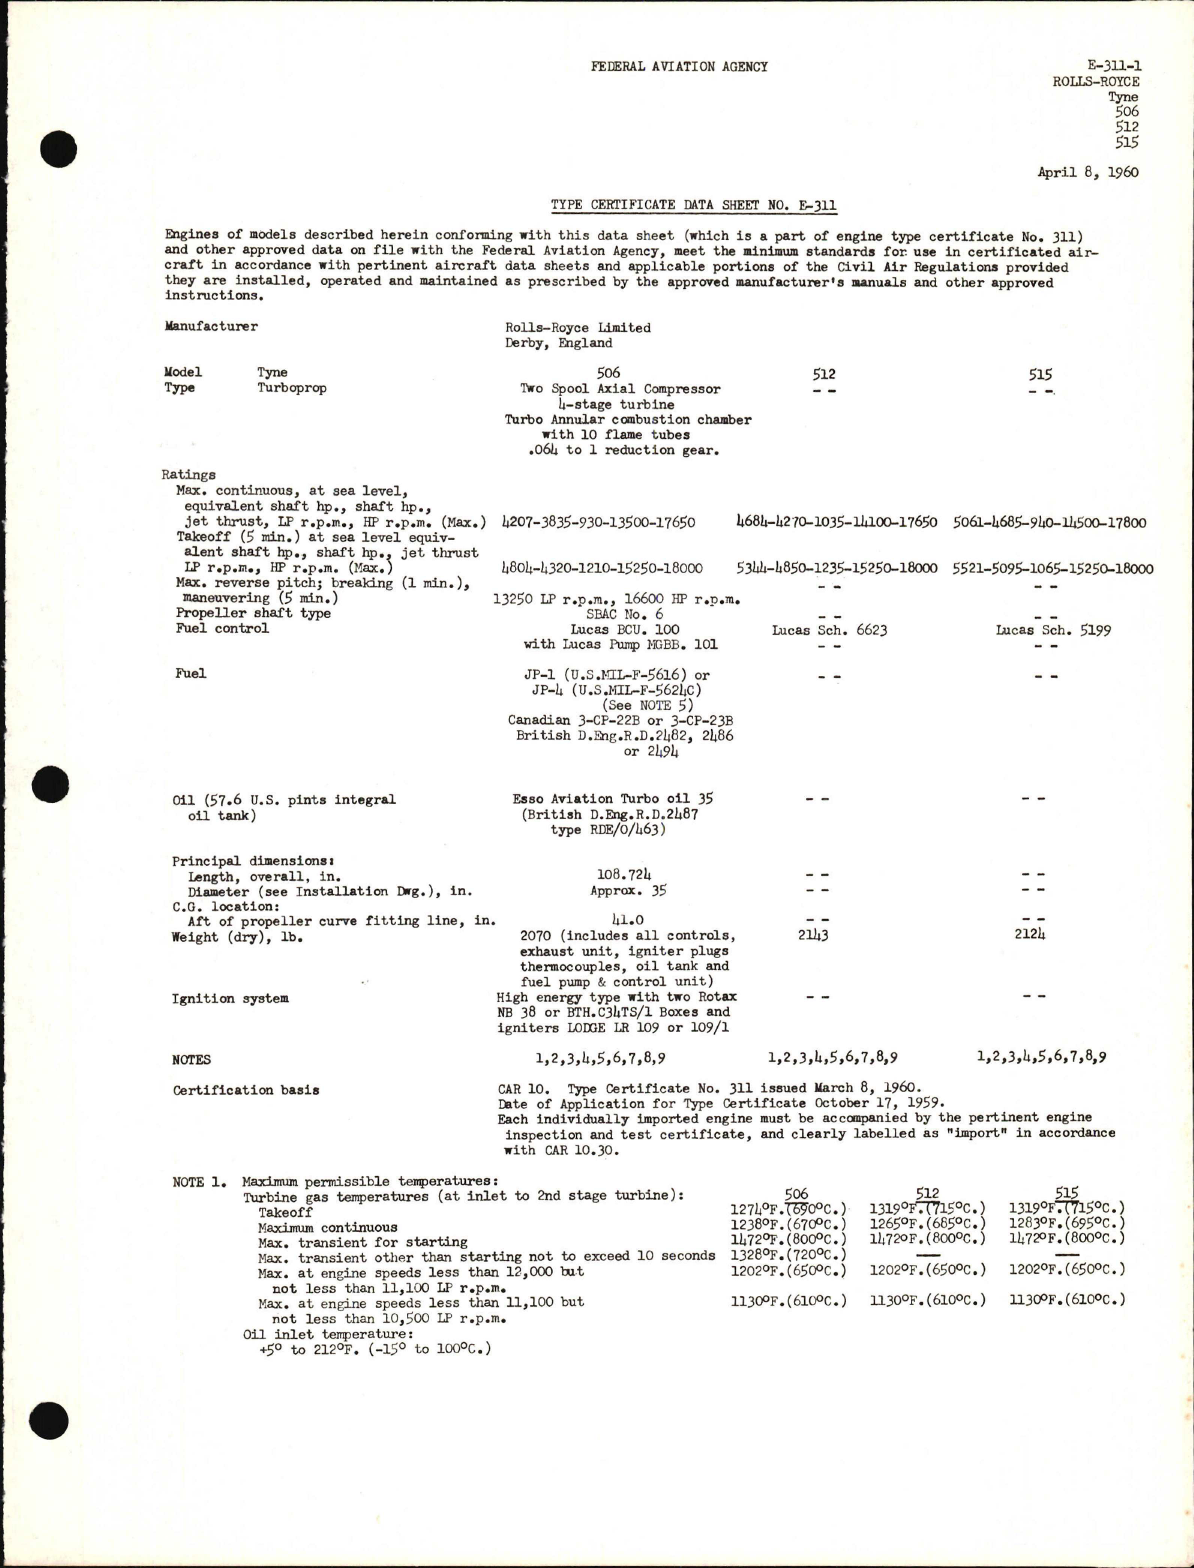 Sample page 1 from AirCorps Library document: Tyne 506, 512 and 515